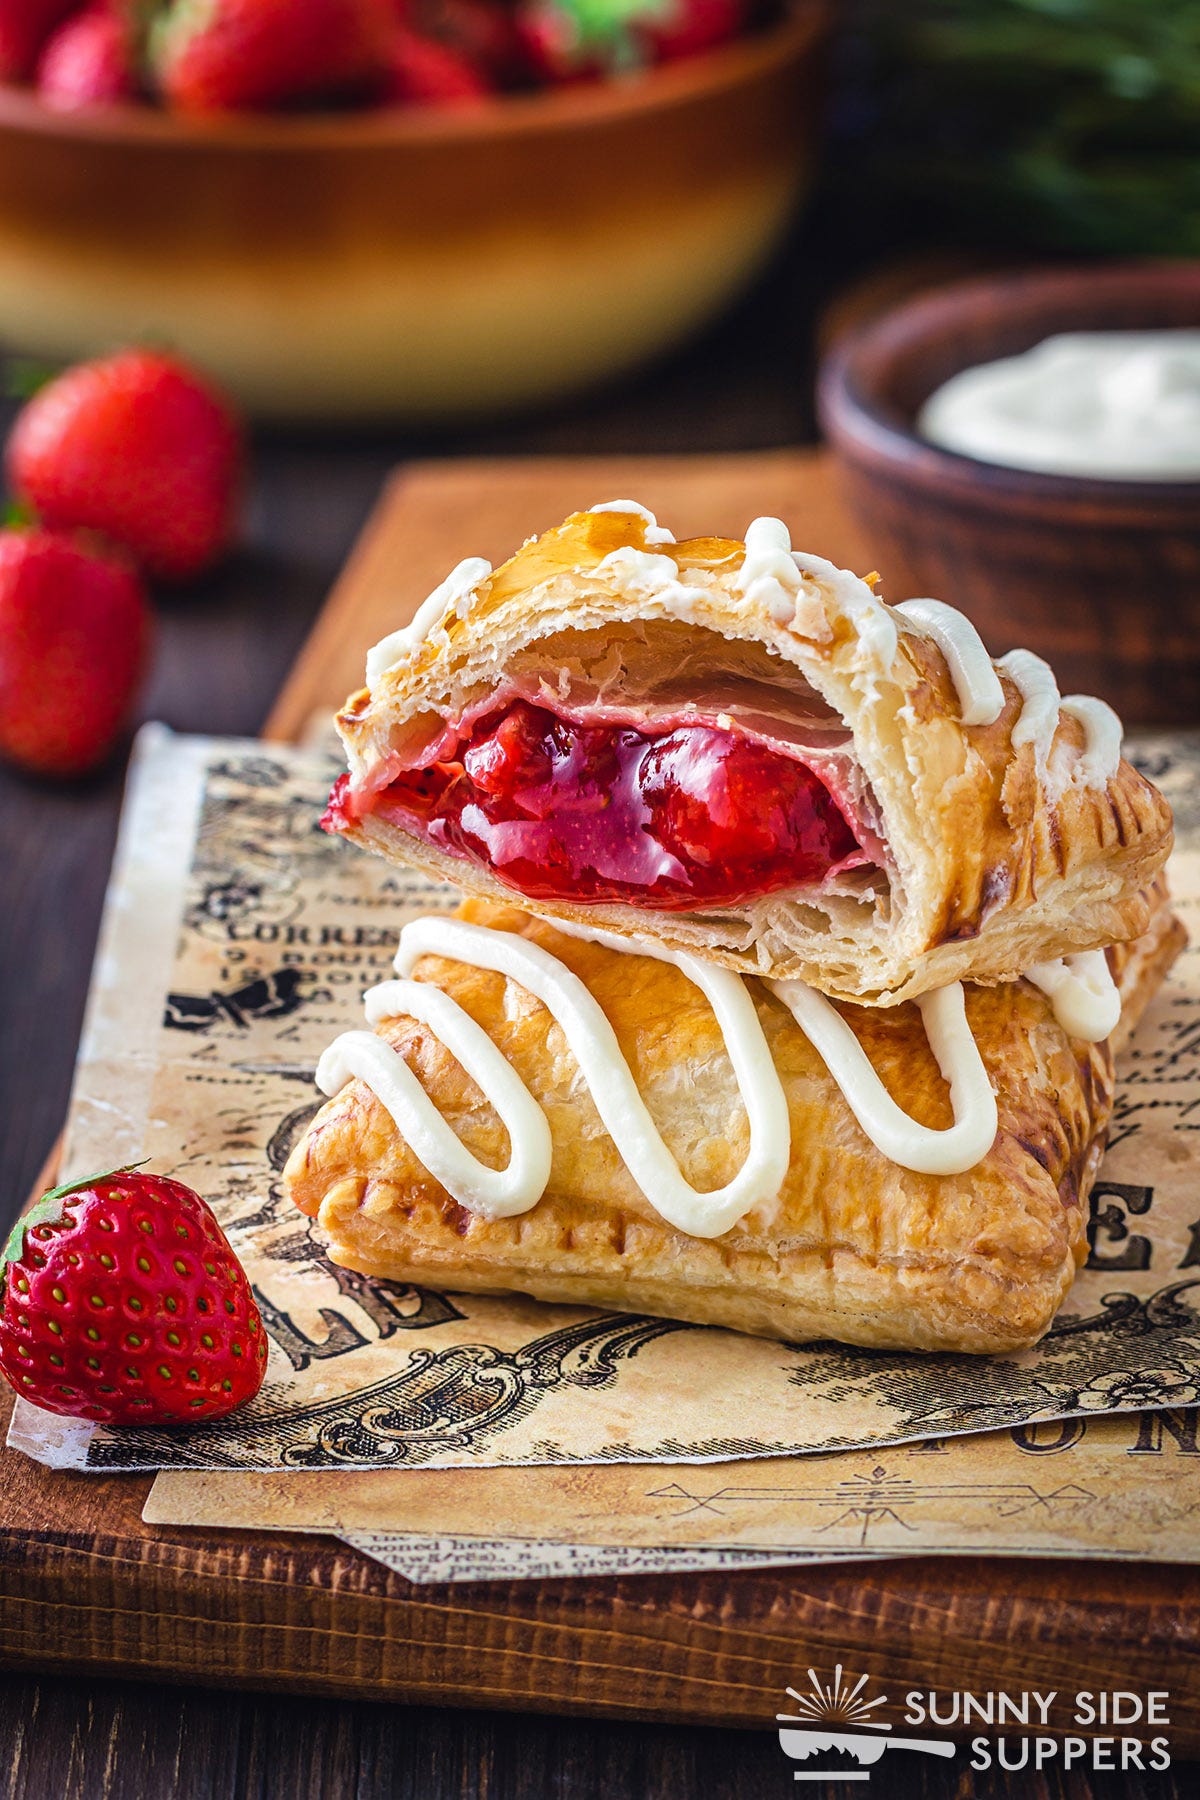 Two strawberry strudels, one cut in half.